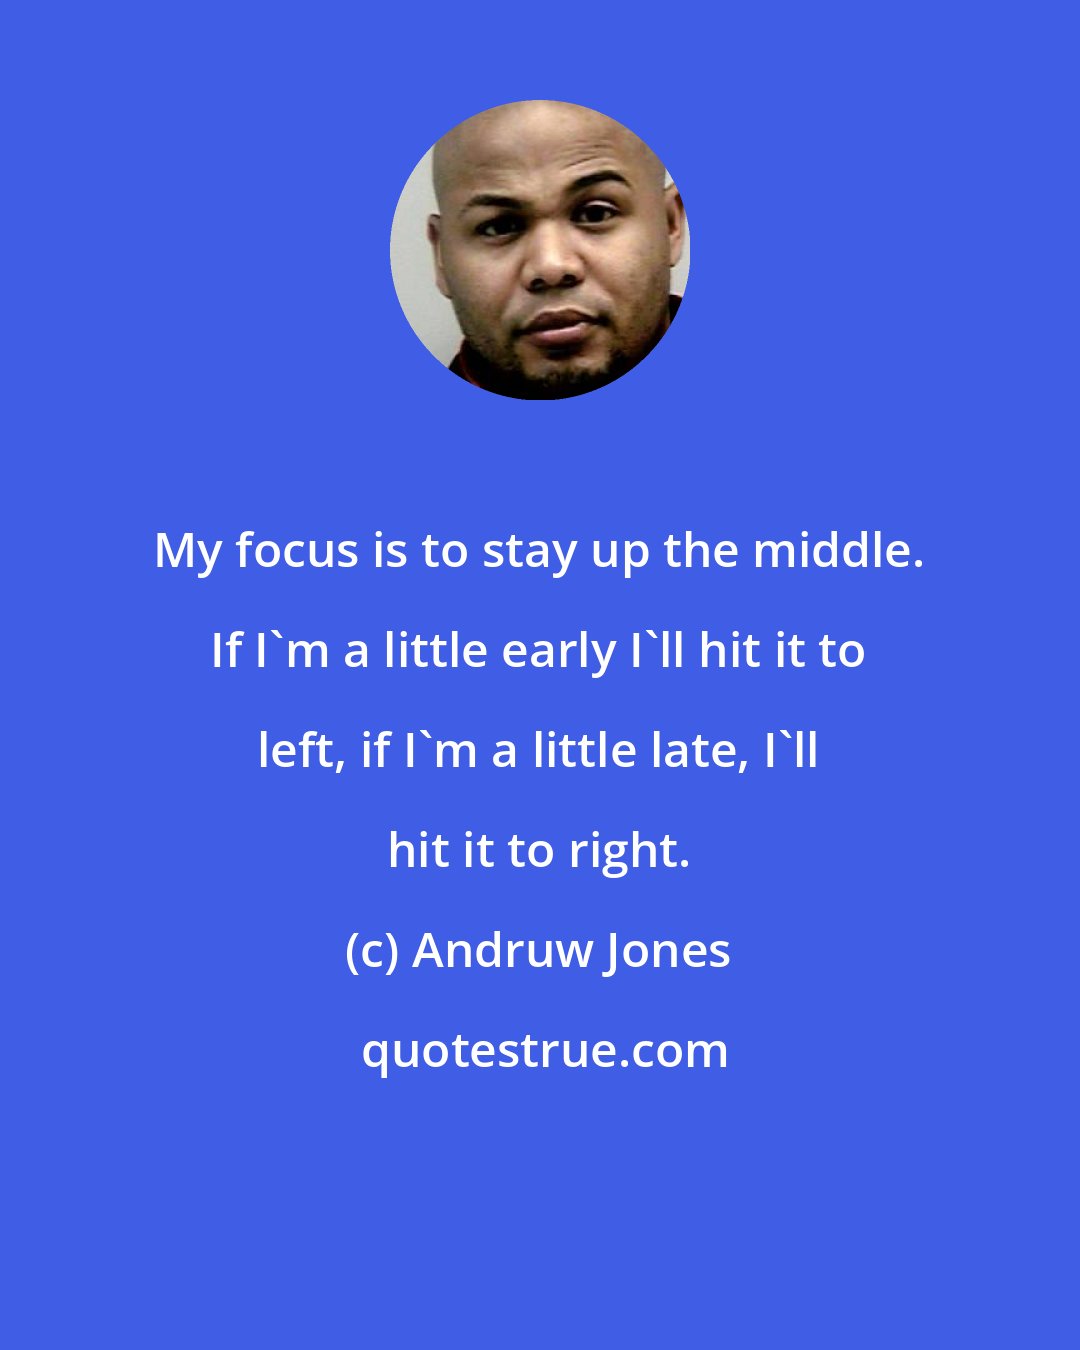 Andruw Jones: My focus is to stay up the middle. If I'm a little early I'll hit it to left, if I'm a little late, I'll hit it to right.